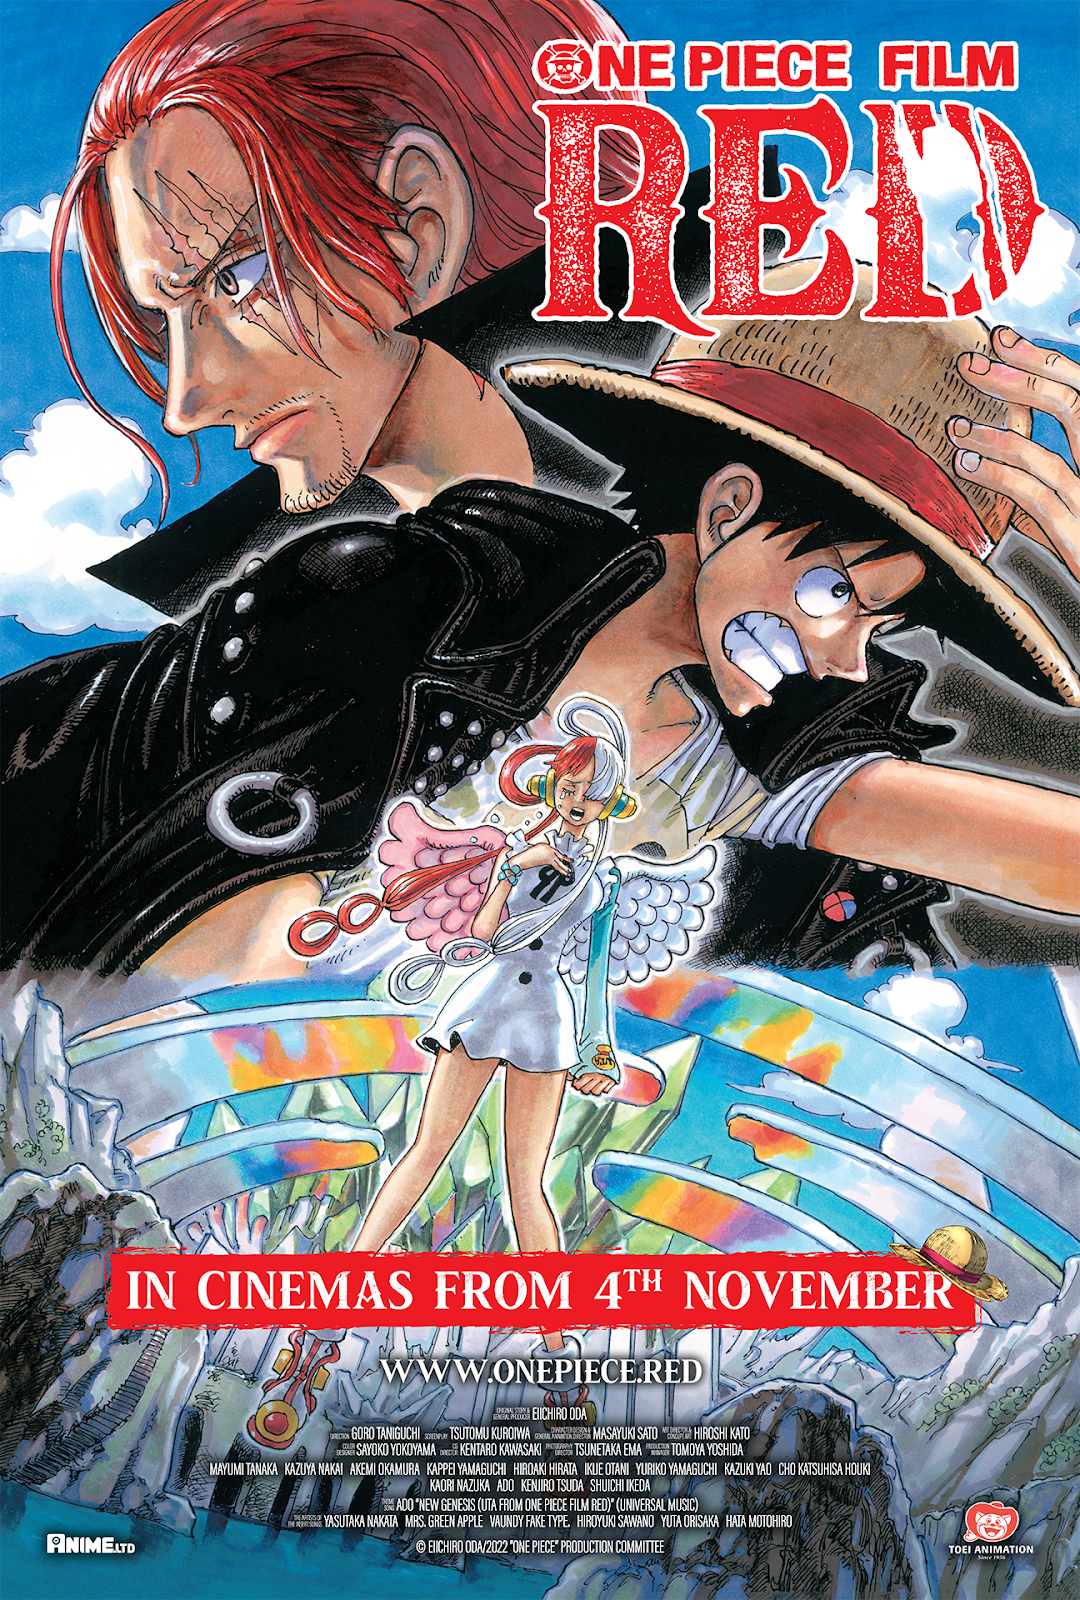 Set Sale for One Piece Film: Red

